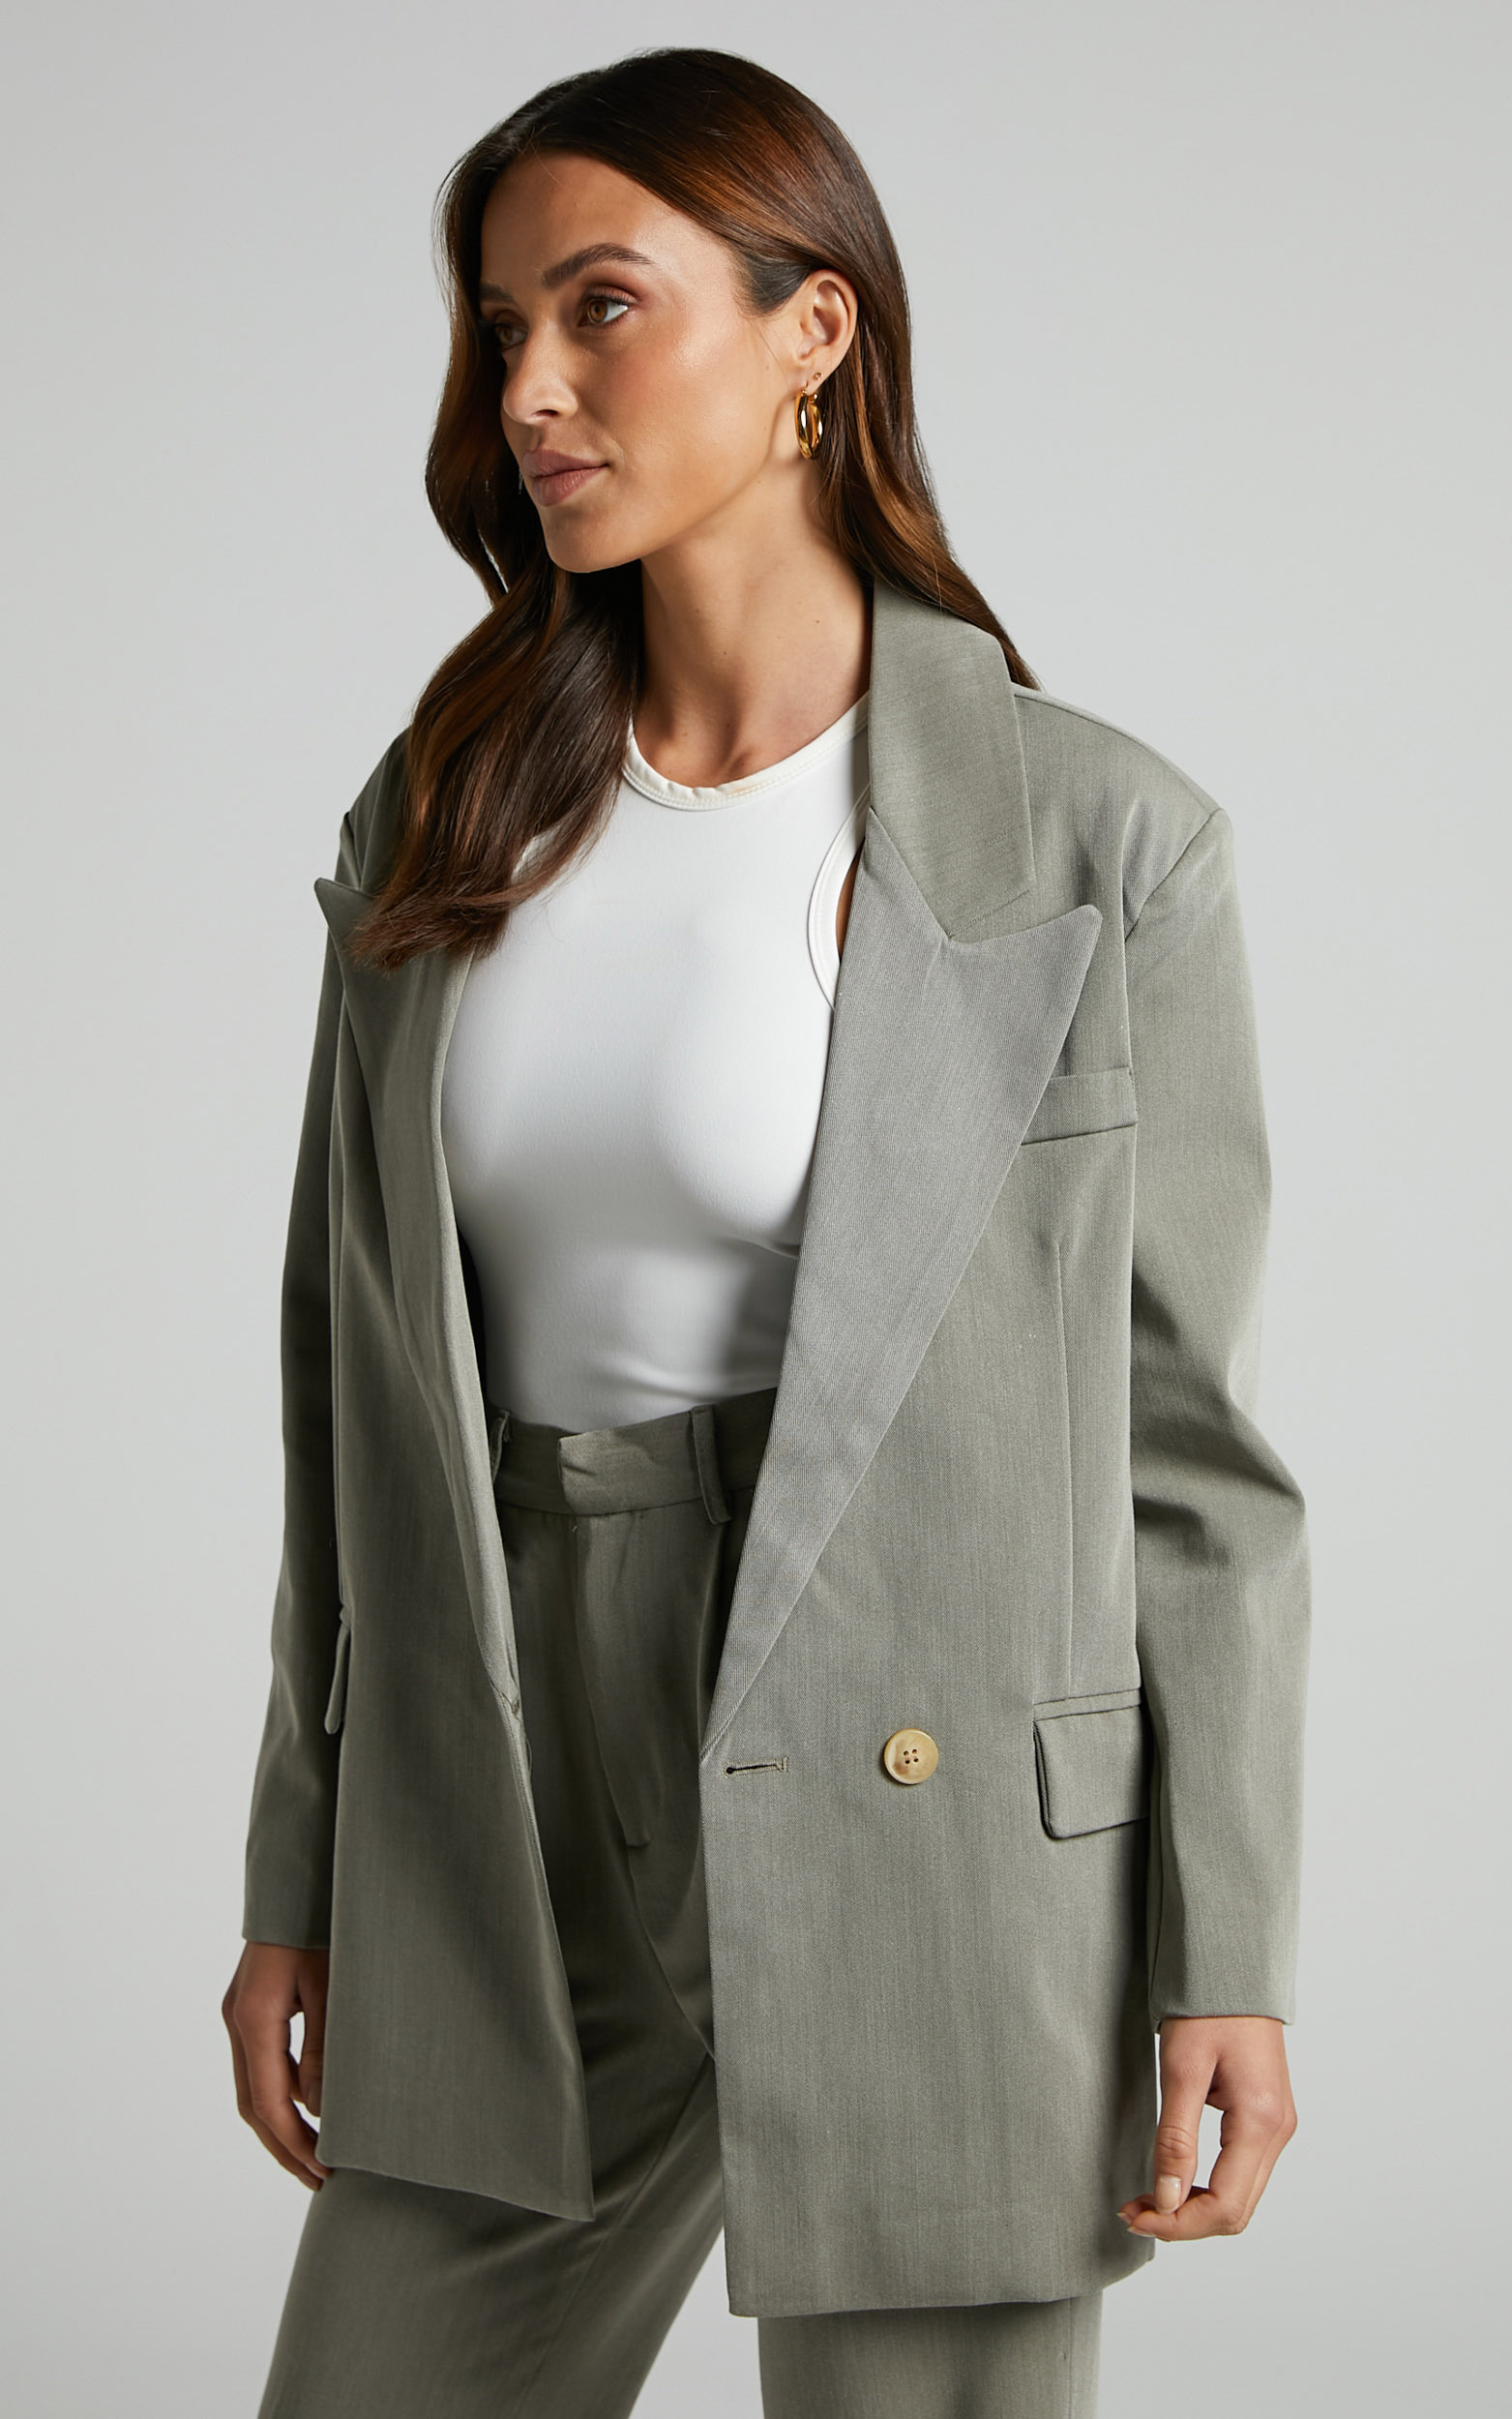 Remi Blazer - Oversized Single Breasted Blazer in Grey in Grey - 06, GRY1, hi-res image number null